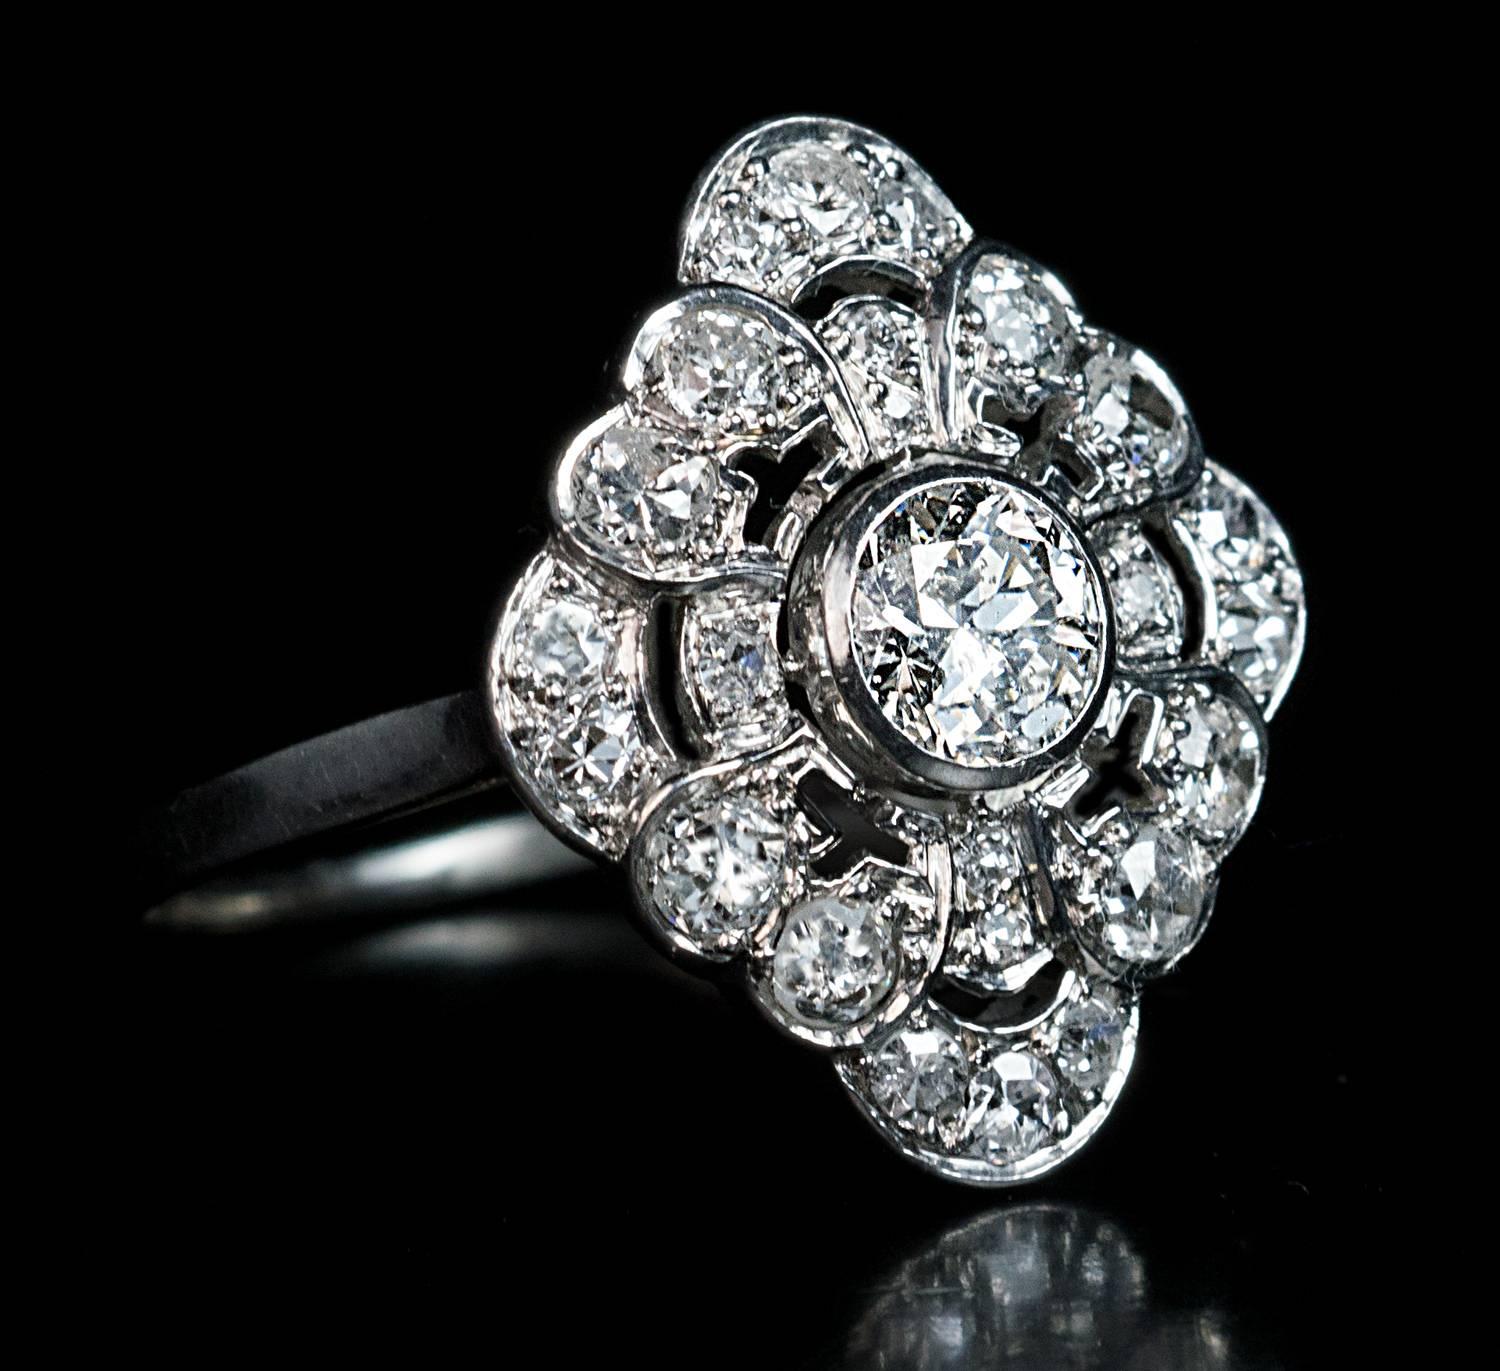 1920s, probably French, marked with lozenge-shaped maker's mark

An openwork platinum ring is set with transitional and old cut diamonds.

The center diamond is approximately 0.60 ct. 

Estimated total diamond weight 1.70 ct

The diamond top